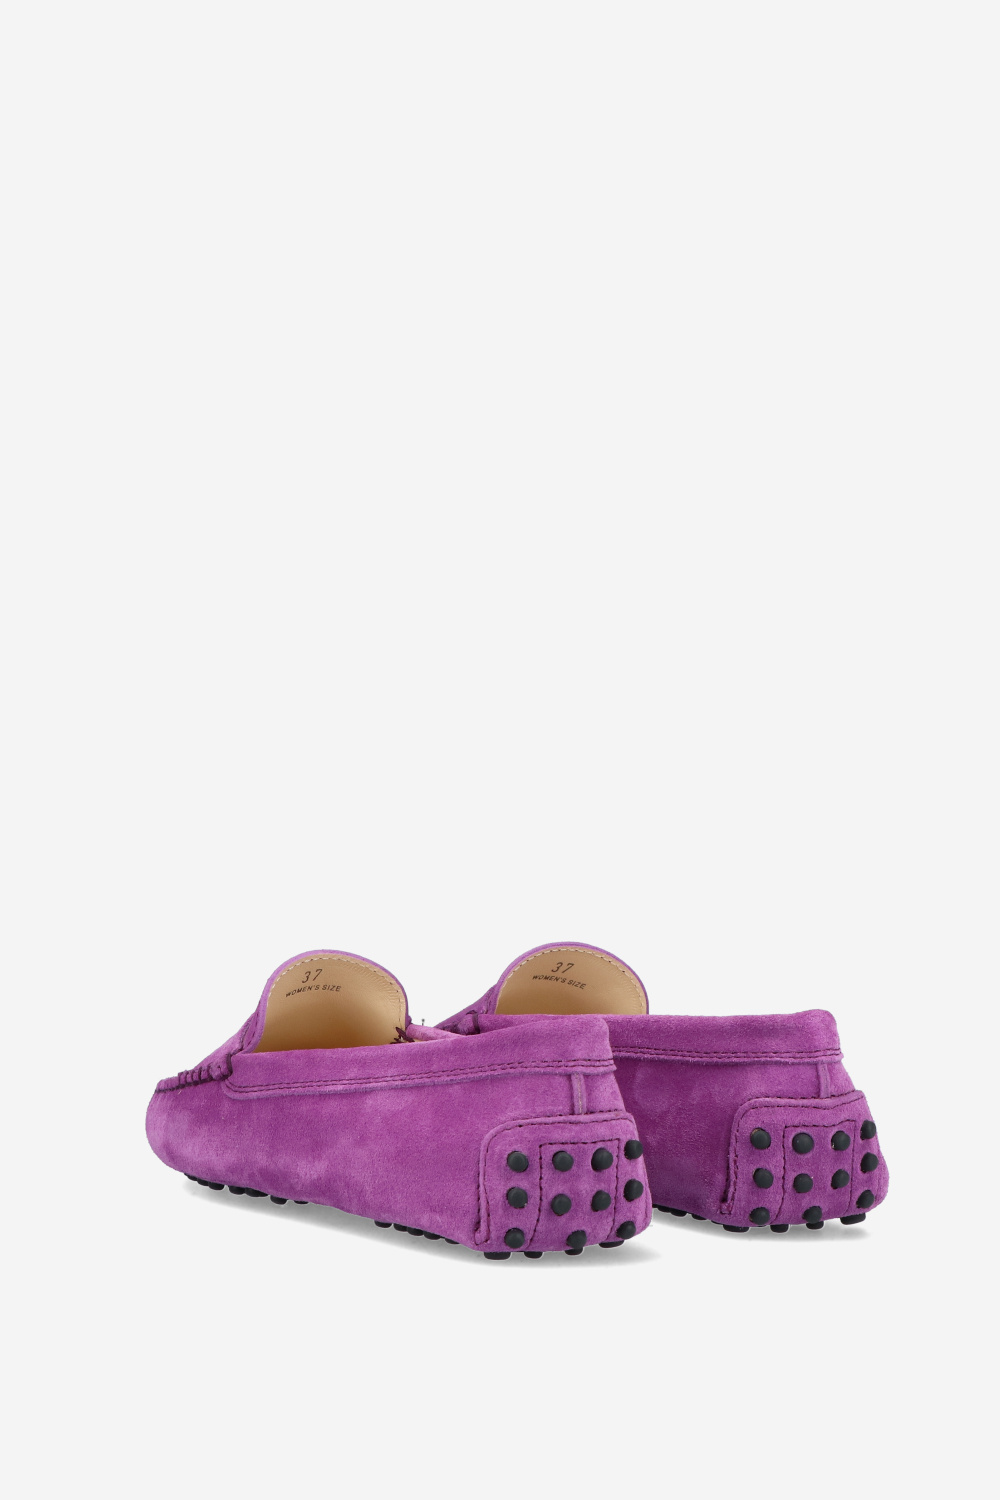 Tods Loafers Purple